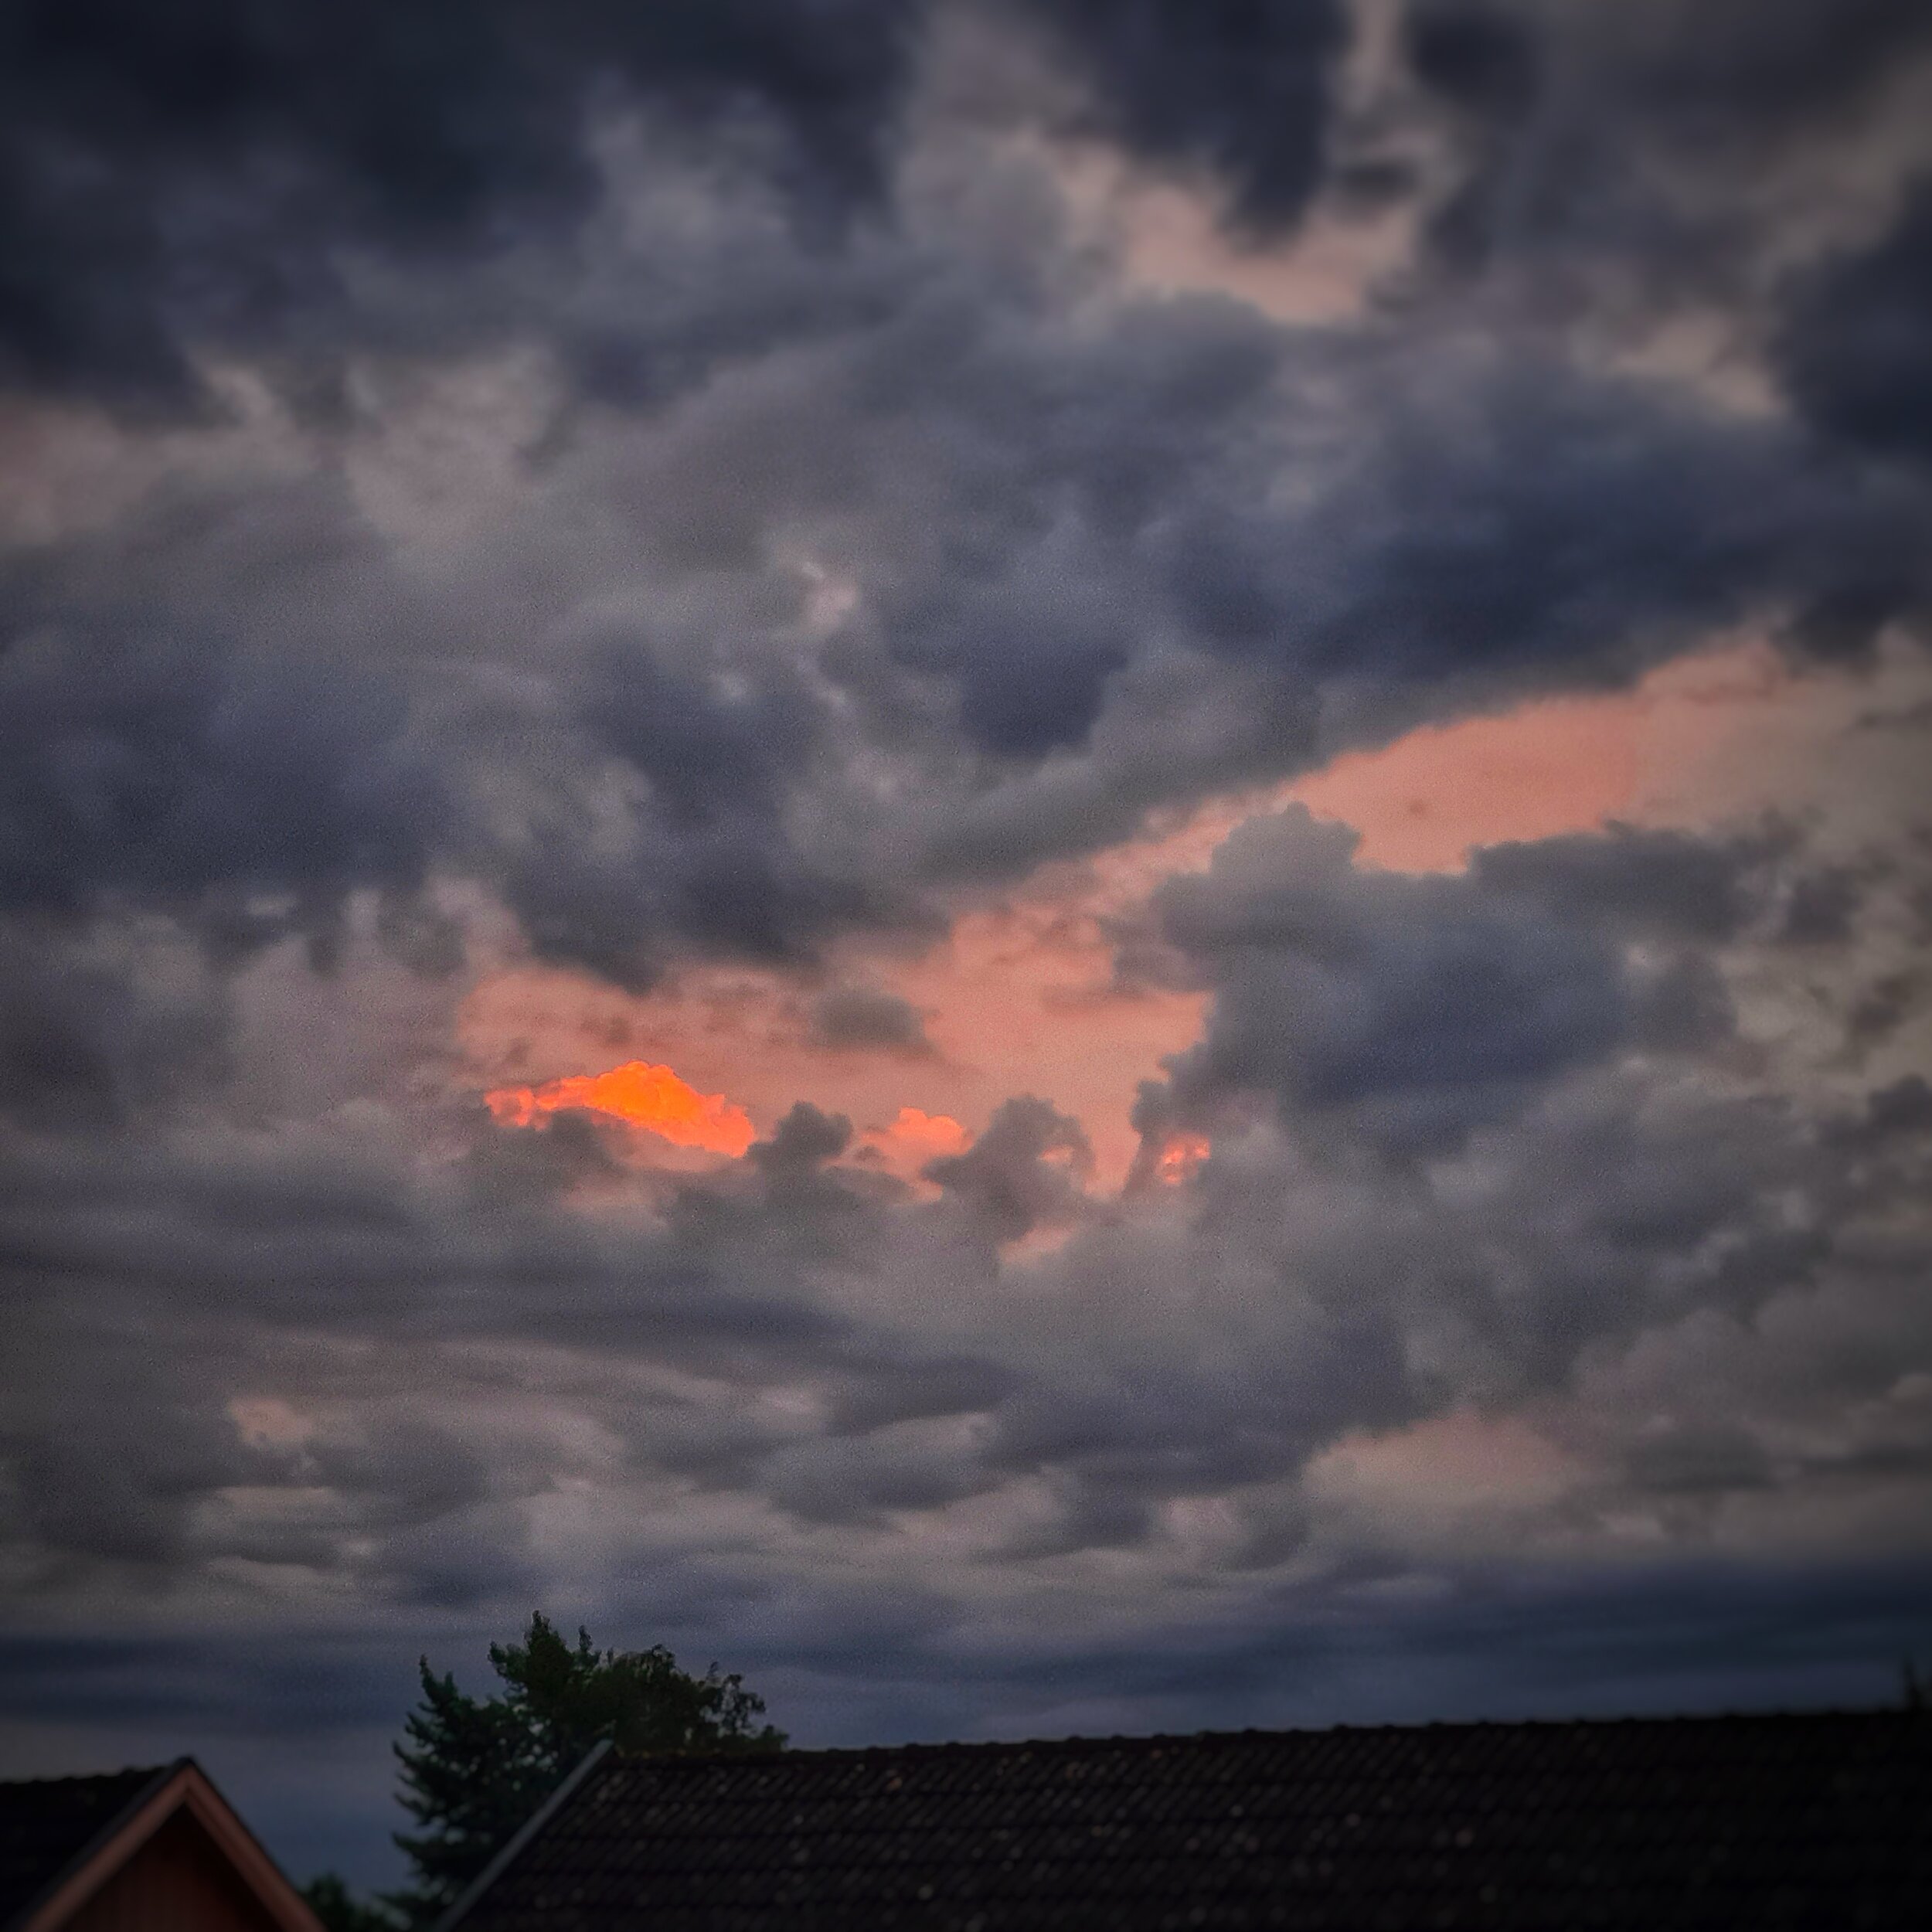 Day 187 - July 6: Red Cloud